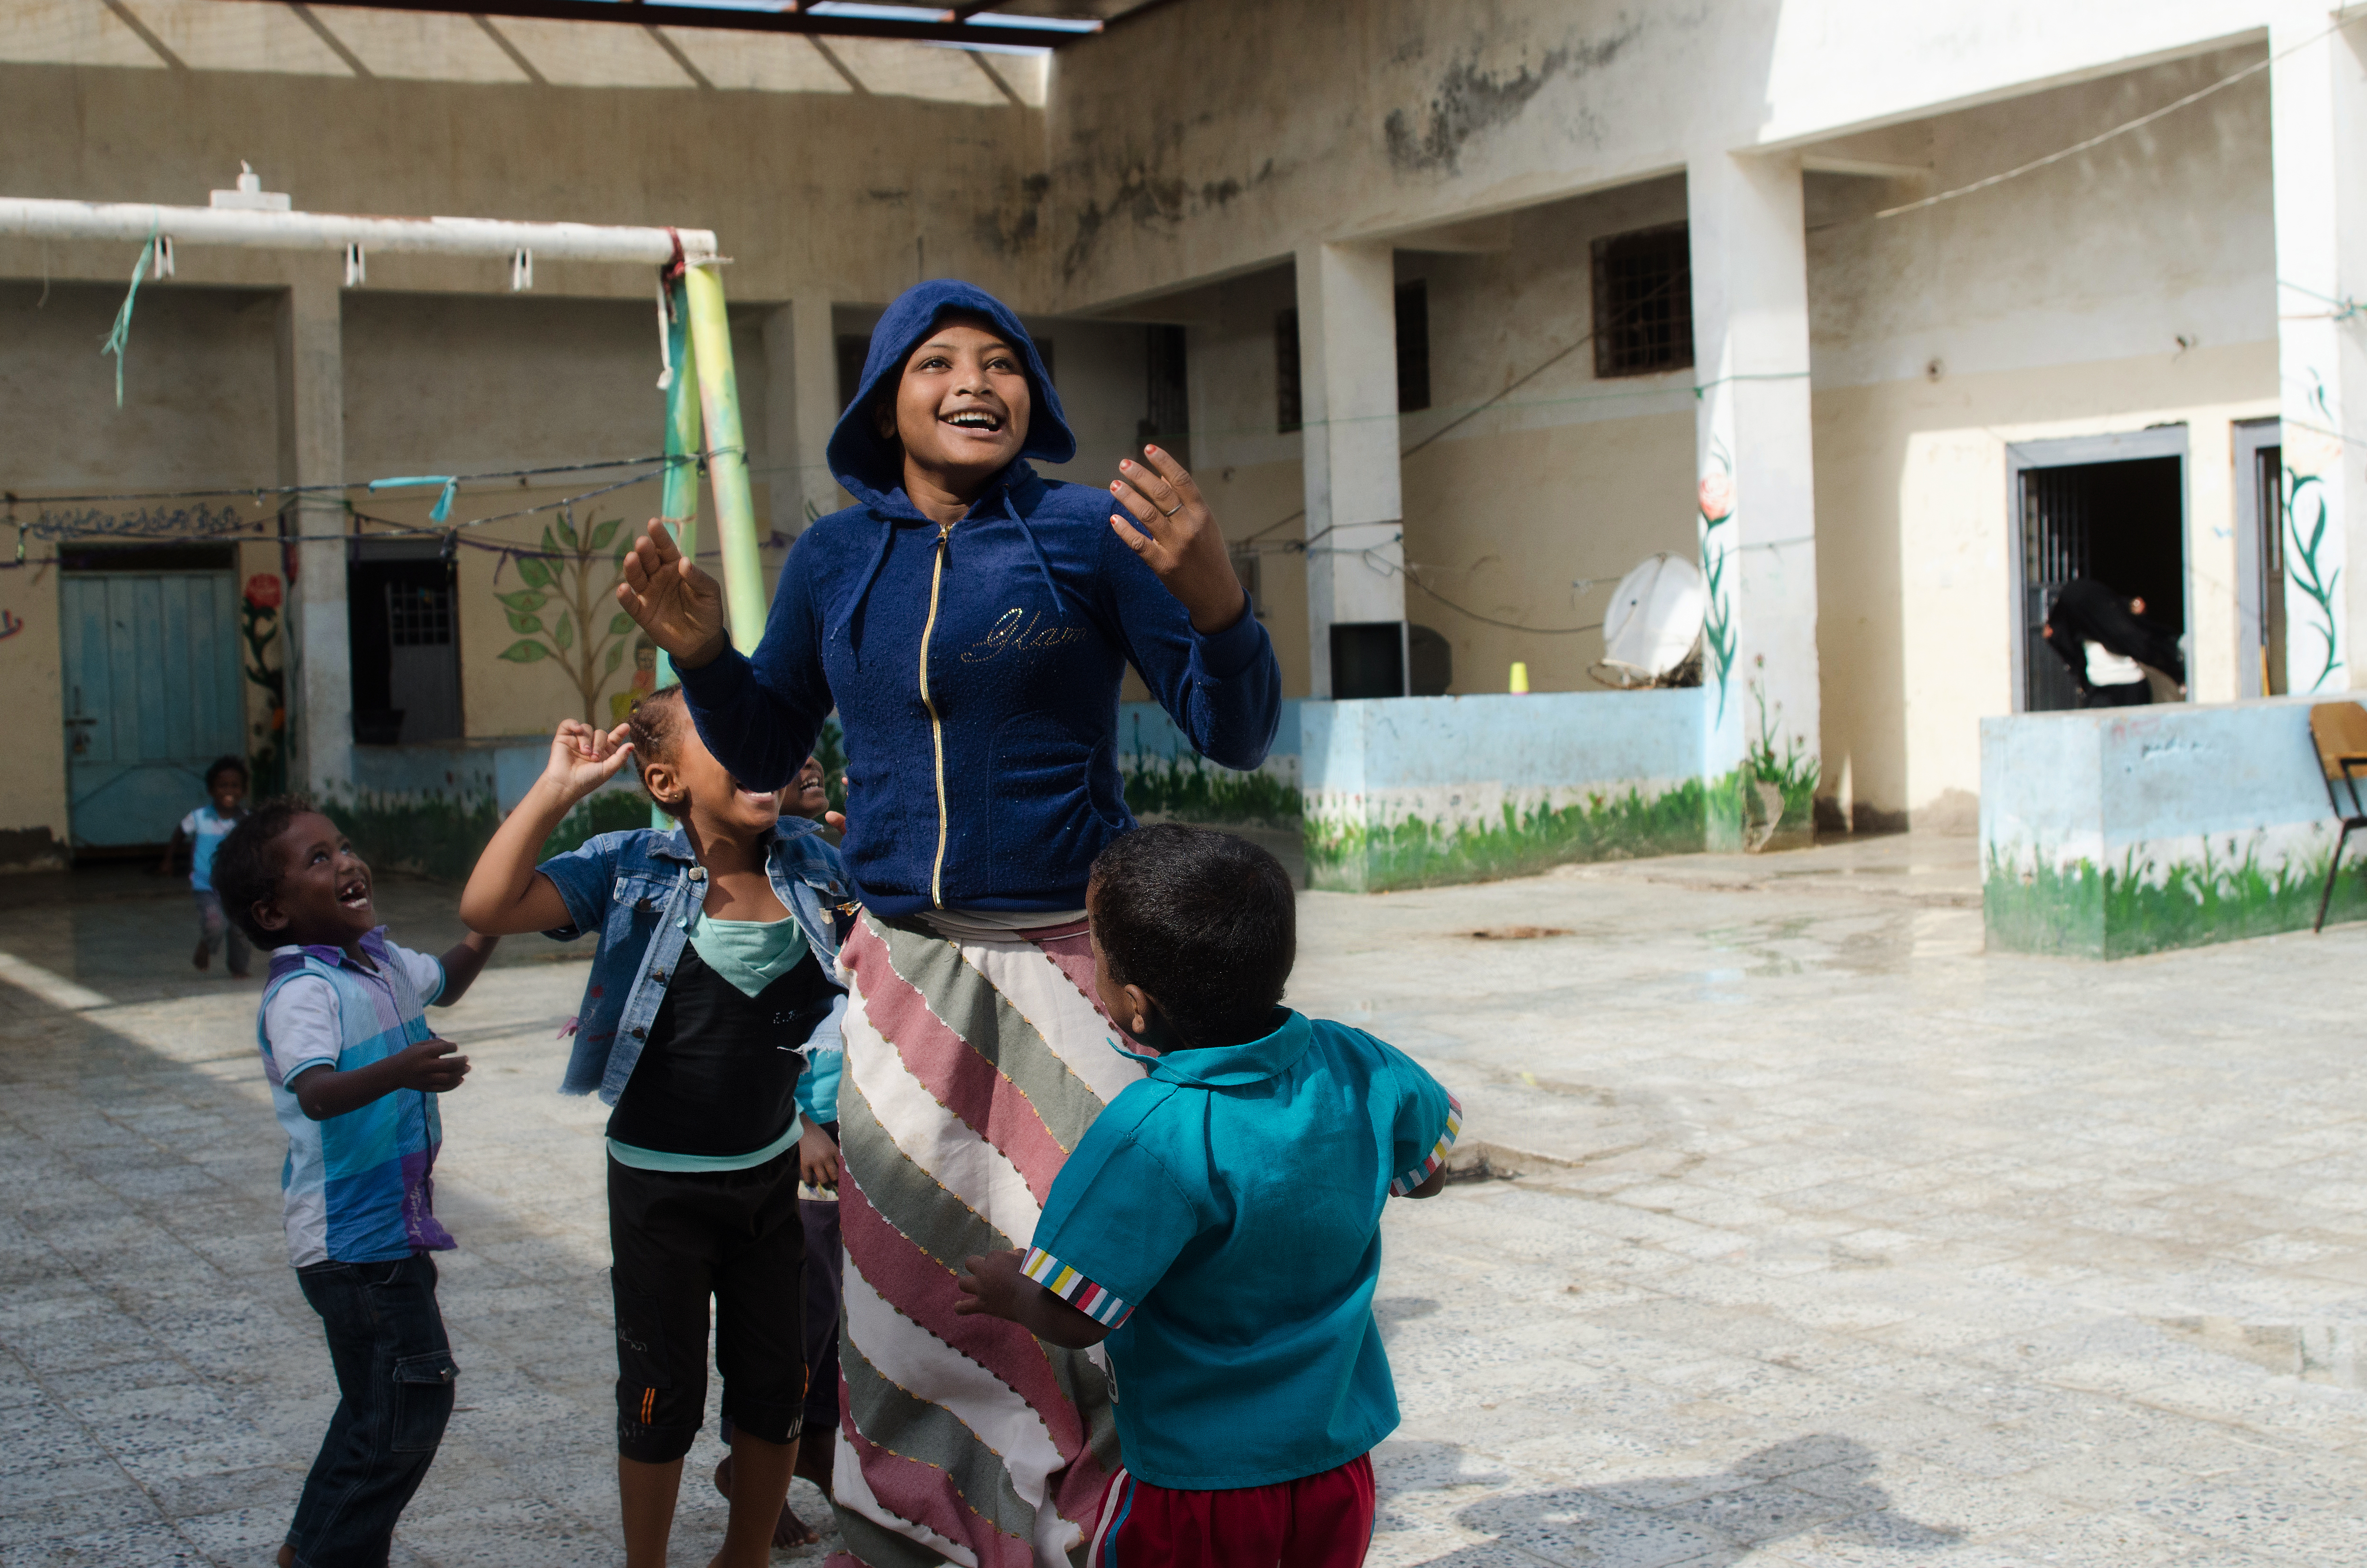 Saeeda, age 16, playing with children from Ethiopia and Eritrea in Hodeidah central prison. Saeeda has special needs, and was found by police and brought there as there's no other place for women in her situation. Photo: Amira Al-Sharif/Progressio 2014 